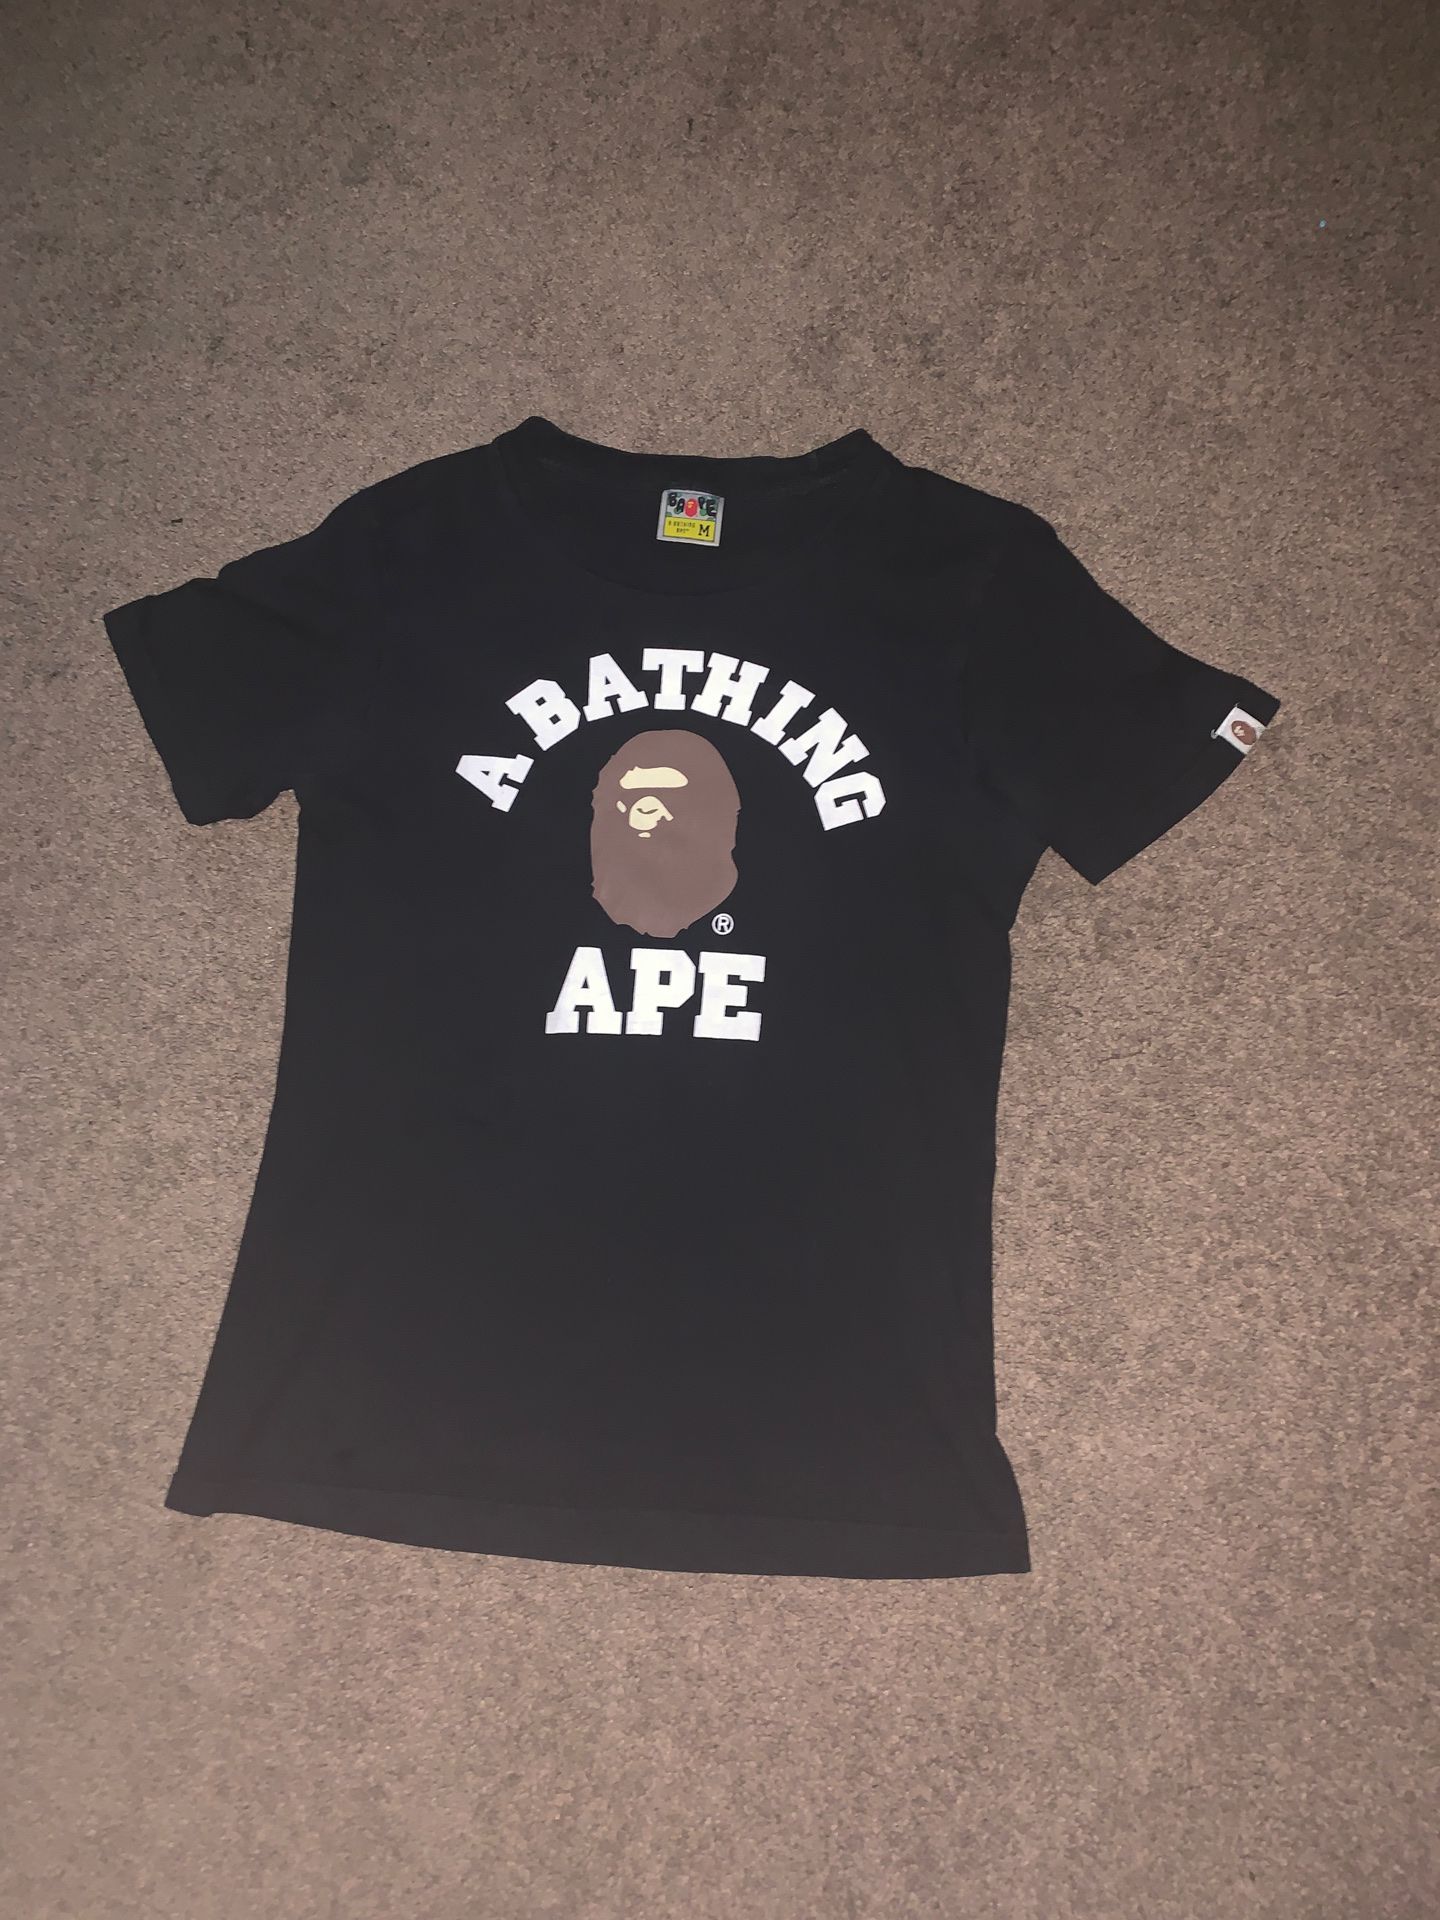 Bathing ape college logo tee size Med price firm